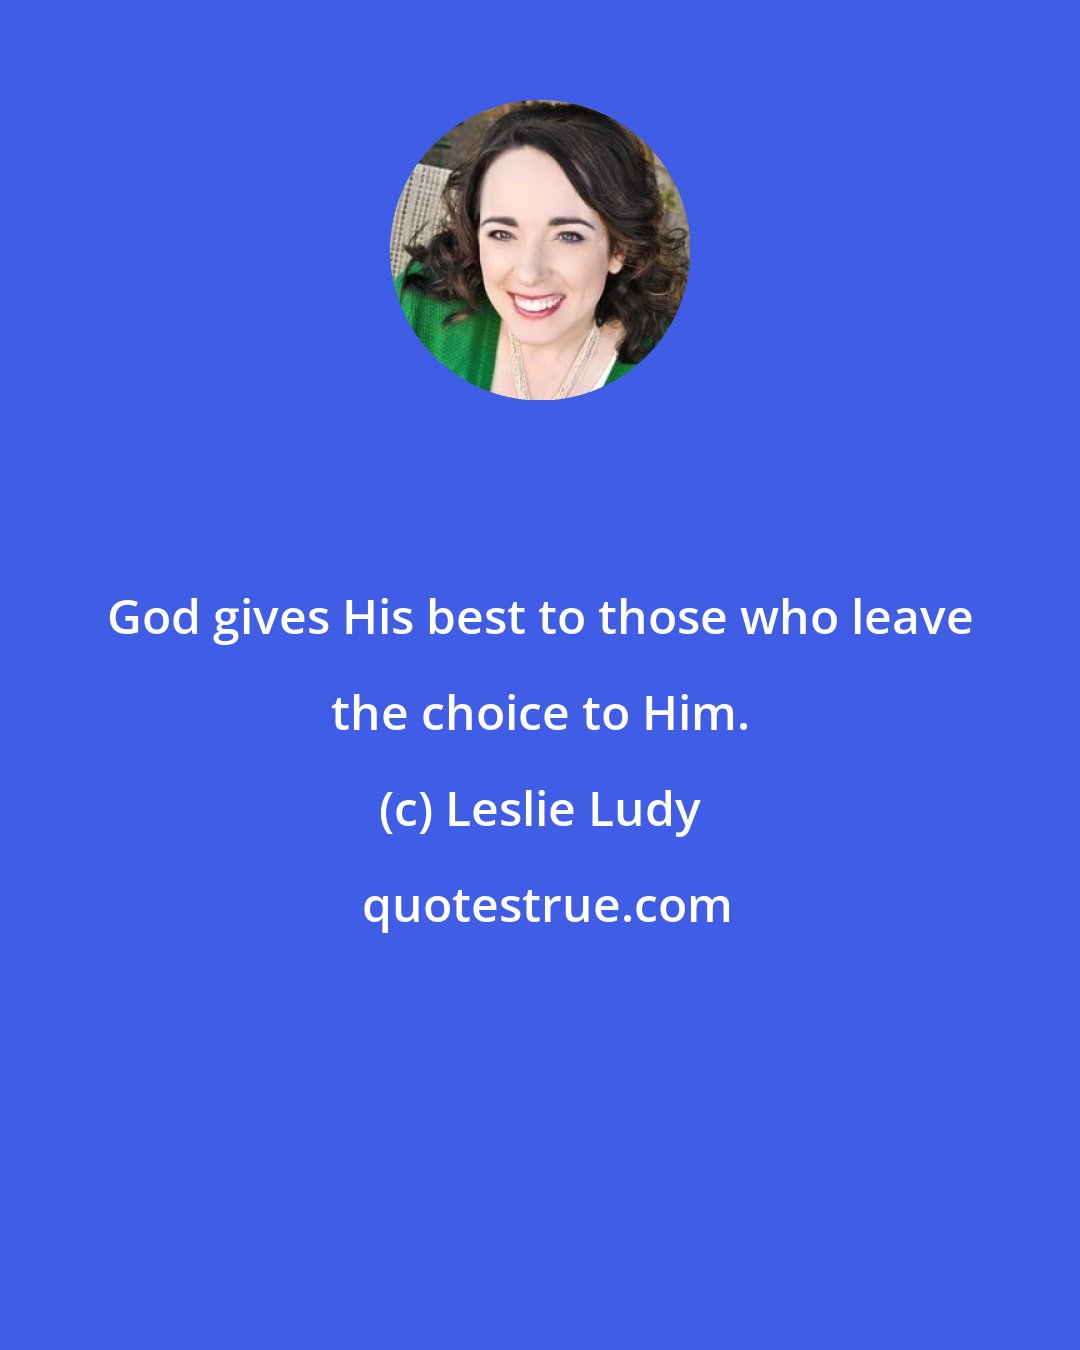 Leslie Ludy: God gives His best to those who leave the choice to Him.